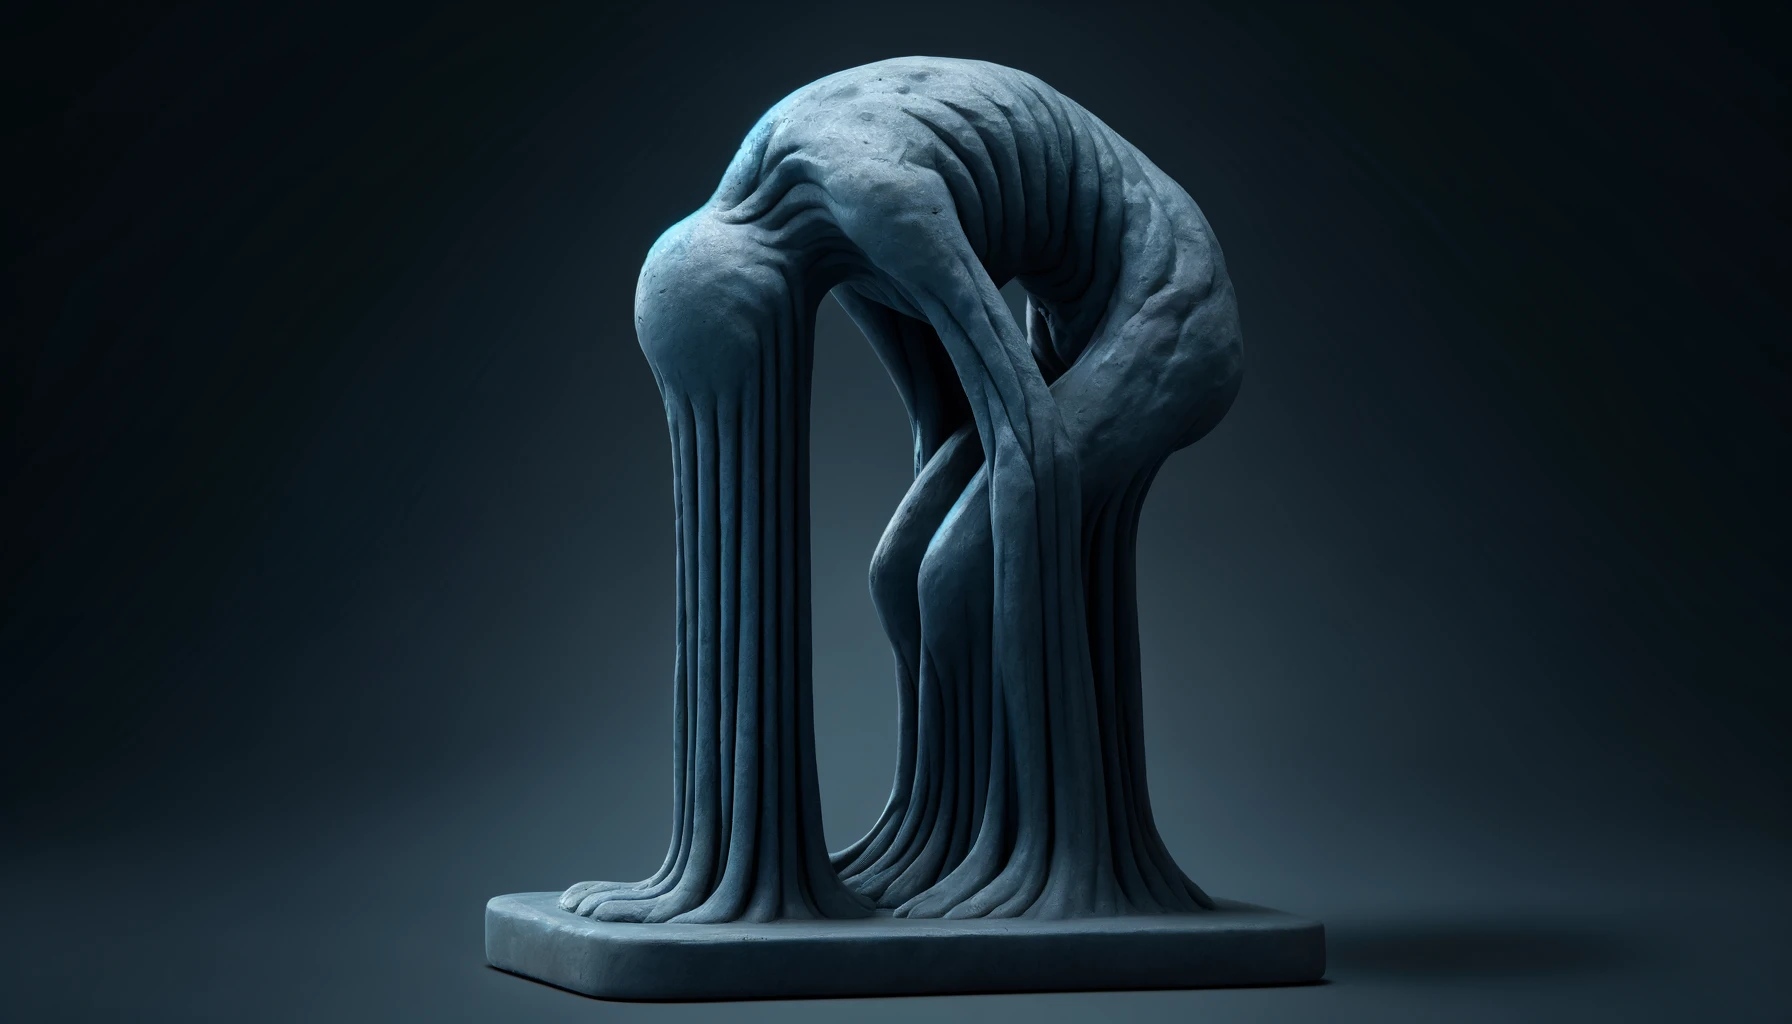 image a sculpture of a body drooping forword, with the head, arms and legs melting into a pile on the ground. This scultpure is in hues of blues and grays.